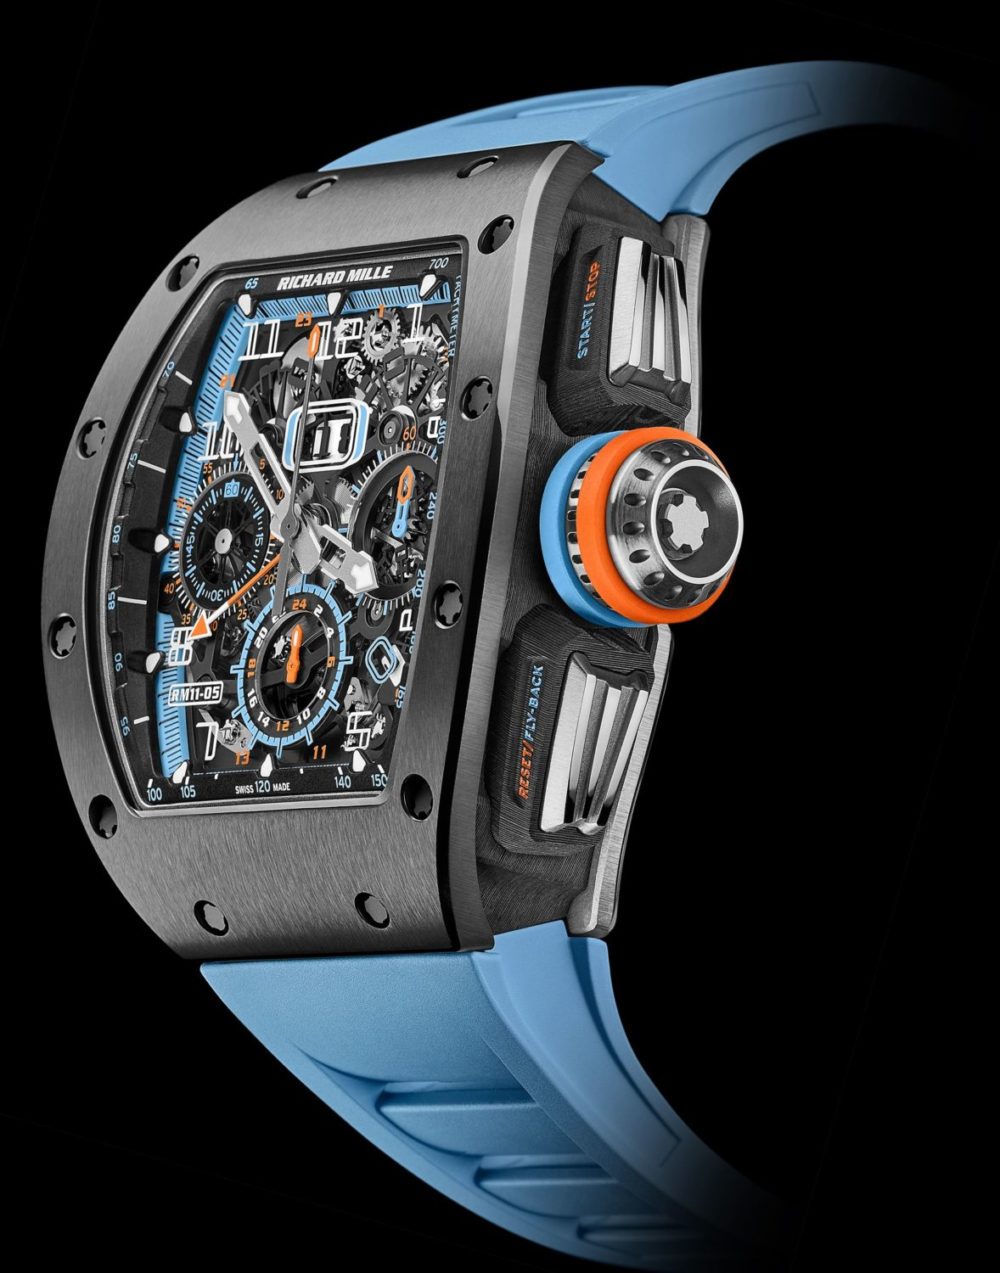 Introducing Richard Mille’s RM 11-05 Automatic Winding Flyback Chronograph GMT